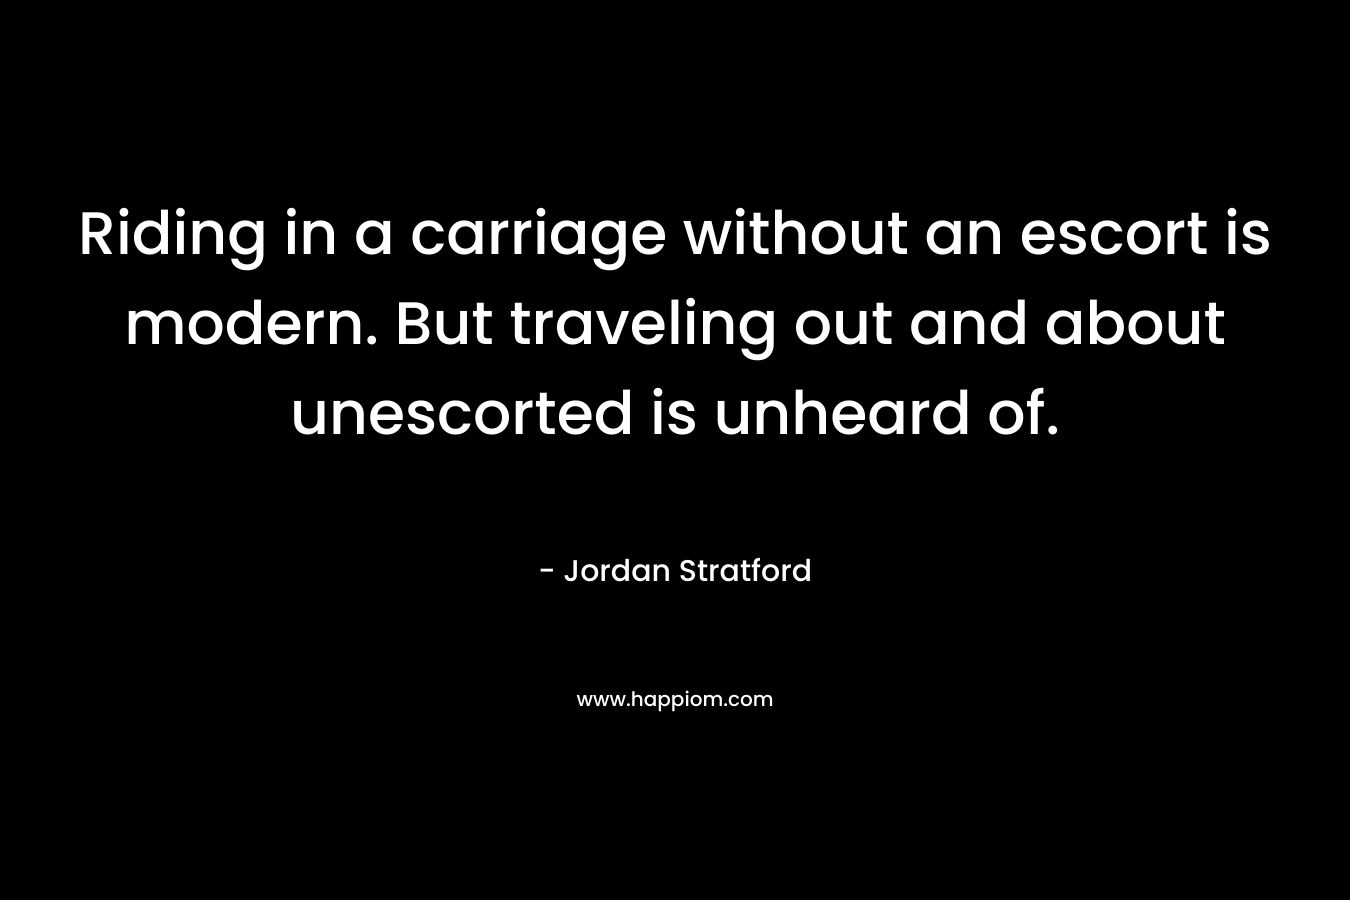 Riding in a carriage without an escort is modern. But traveling out and about unescorted is unheard of. – Jordan Stratford